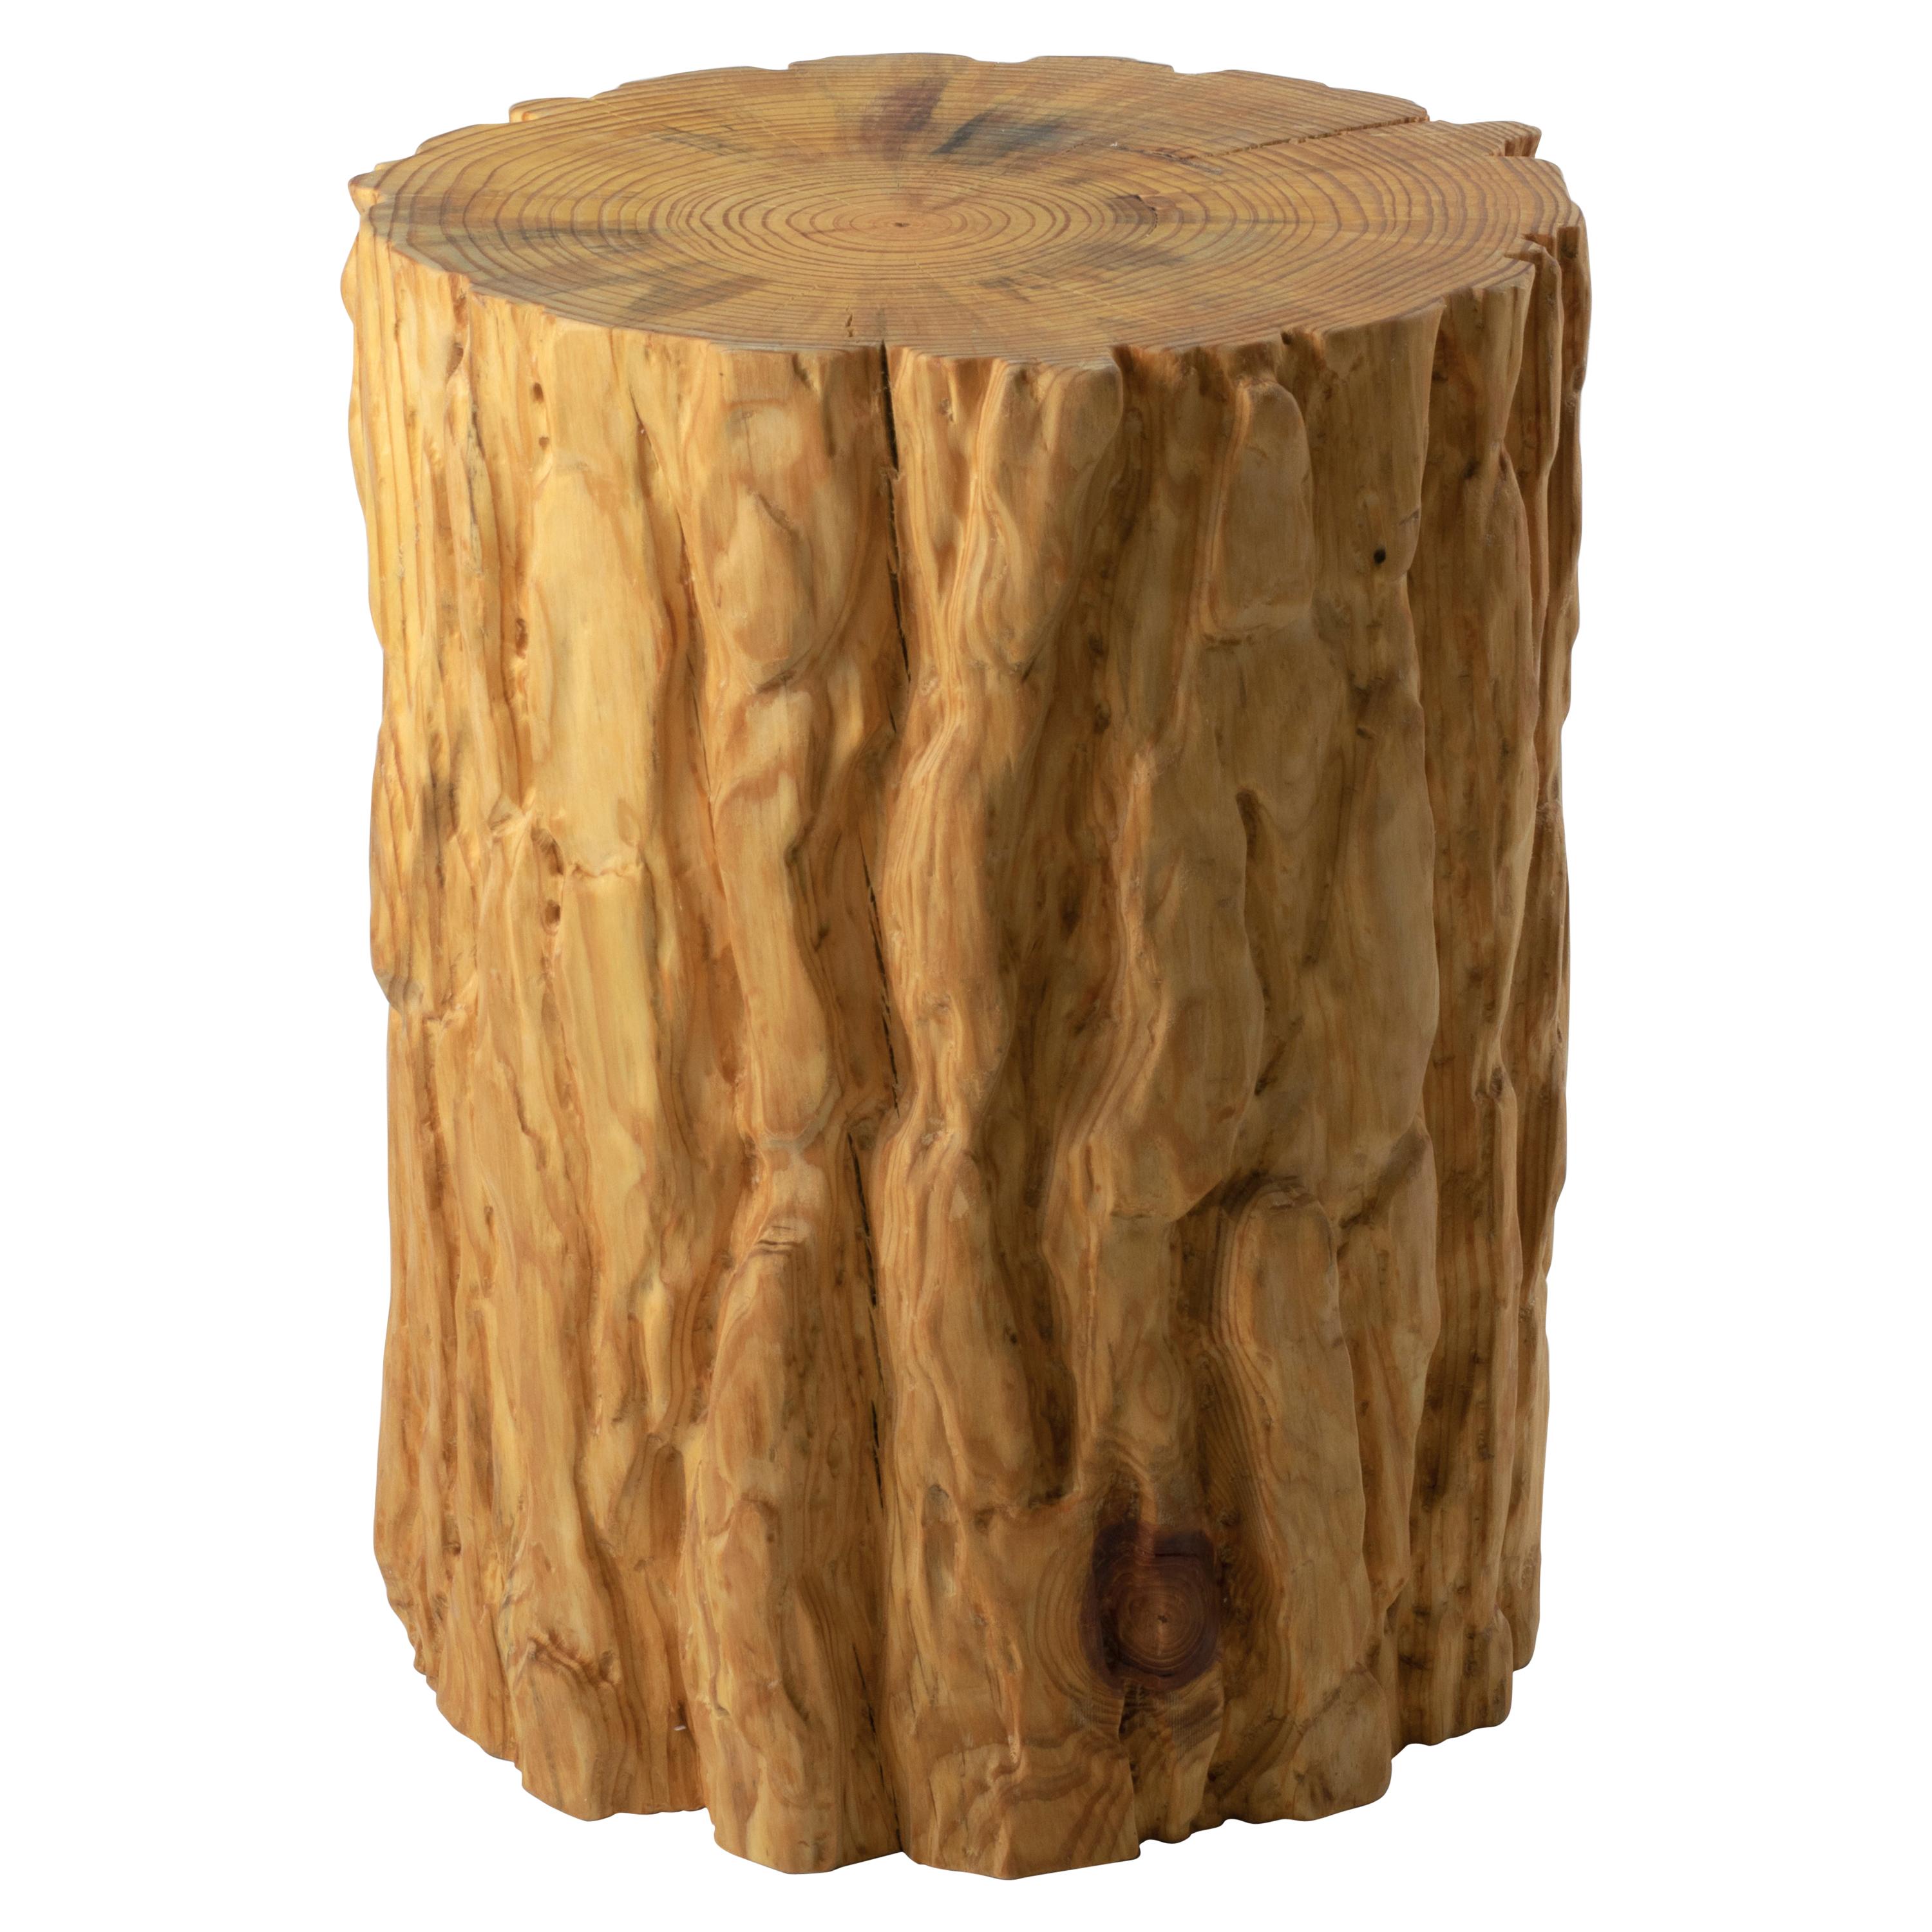 Zero Bark Map Stool by Timbur, Represented by Tuleste Factory For Sale